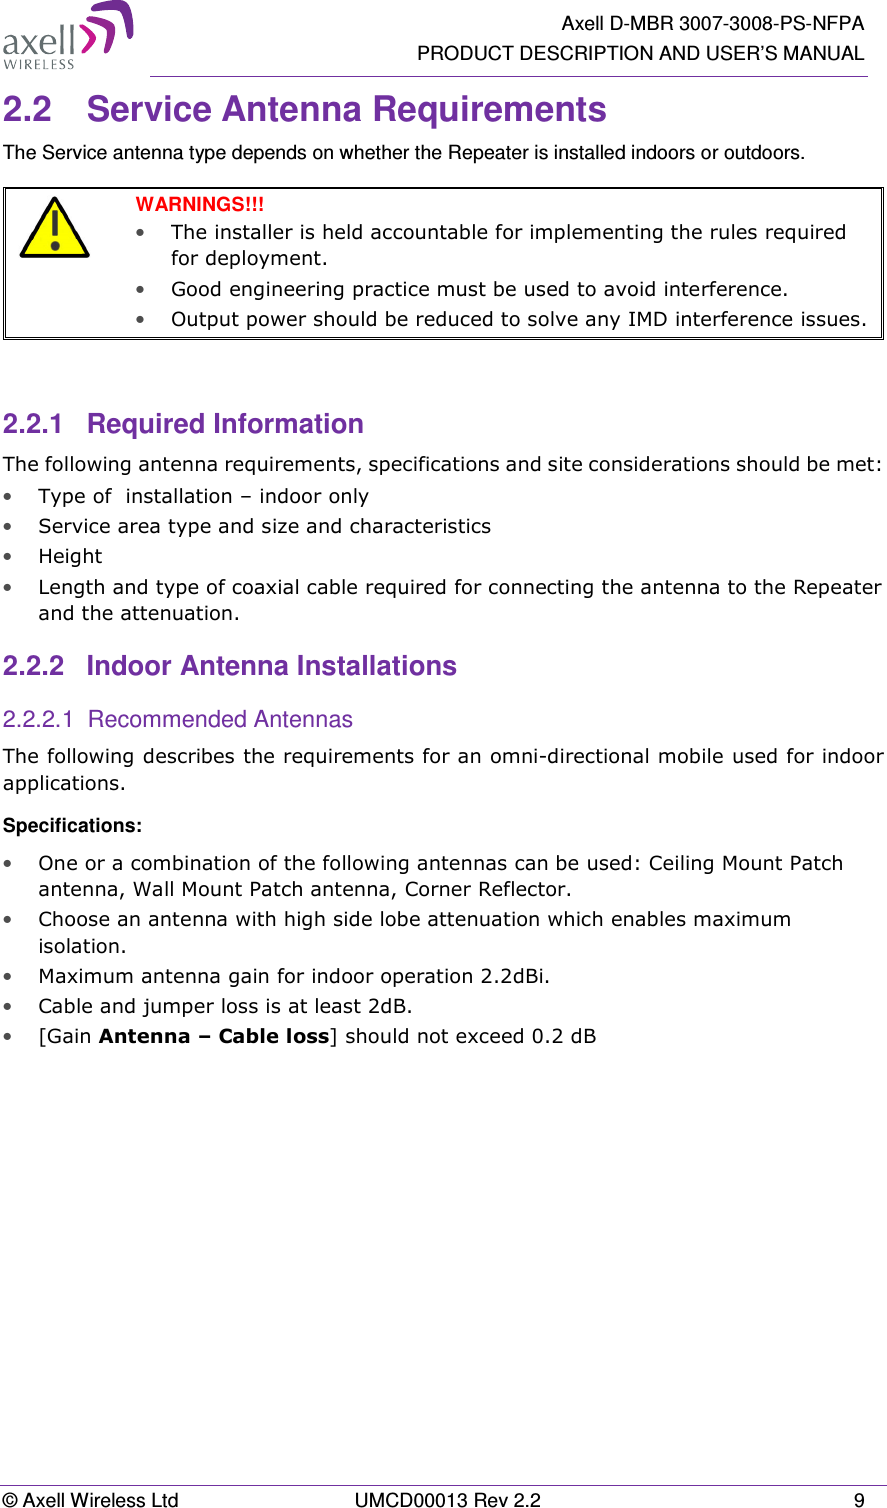   Axell D-MBR 3007-3008-PS-NFPA PRODUCT DESCRIPTION AND USER’S MANUAL © Axell Wireless Ltd  UMCD00013 Rev 2.2  9 2.2  Service Antenna Requirements The Service antenna type depends on whether the Repeater is installed indoors or outdoors.    WARNINGS!!!  • The installer is held accountable for implementing the rules required for deployment.  • Good engineering practice must be used to avoid interference.   • Output power should be reduced to solve any IMD interference issues.   2.2.1  Required Information The following antenna requirements, specifications and site considerations should be met: • Type of  installation – indoor only  • Service area type and size and characteristics • Height • Length and type of coaxial cable required for connecting the antenna to the Repeater and the attenuation. 2.2.2  Indoor Antenna Installations 2.2.2.1  Recommended Antennas The following describes the requirements for an omni-directional mobile used for indoor applications. Specifications: • One or a combination of the following antennas can be used: Ceiling Mount Patch antenna, Wall Mount Patch antenna, Corner Reflector. • Choose an antenna with high side lobe attenuation which enables maximum isolation. • Maximum antenna gain for indoor operation 2.2dBi.  • Cable and jumper loss is at least 2dB. • [Gain Antenna – Cable loss] should not exceed 0.2 dB   